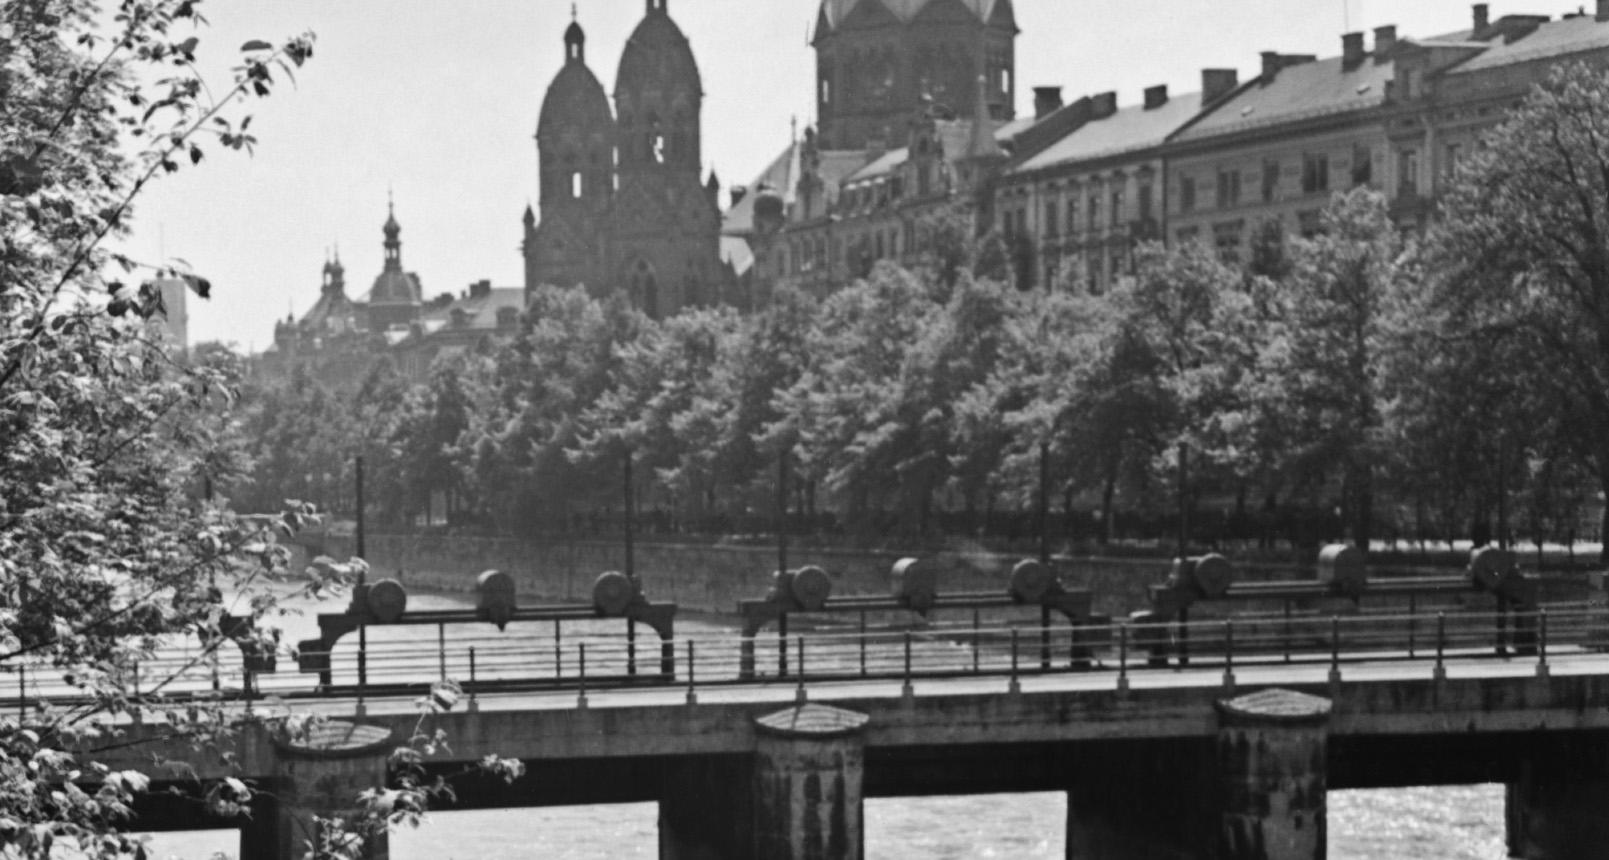 Bridge at Isar view to Lutheran St. Lukas church, Germany 1937, Printed Later - Photograph by Karl Heinrich Lämmel